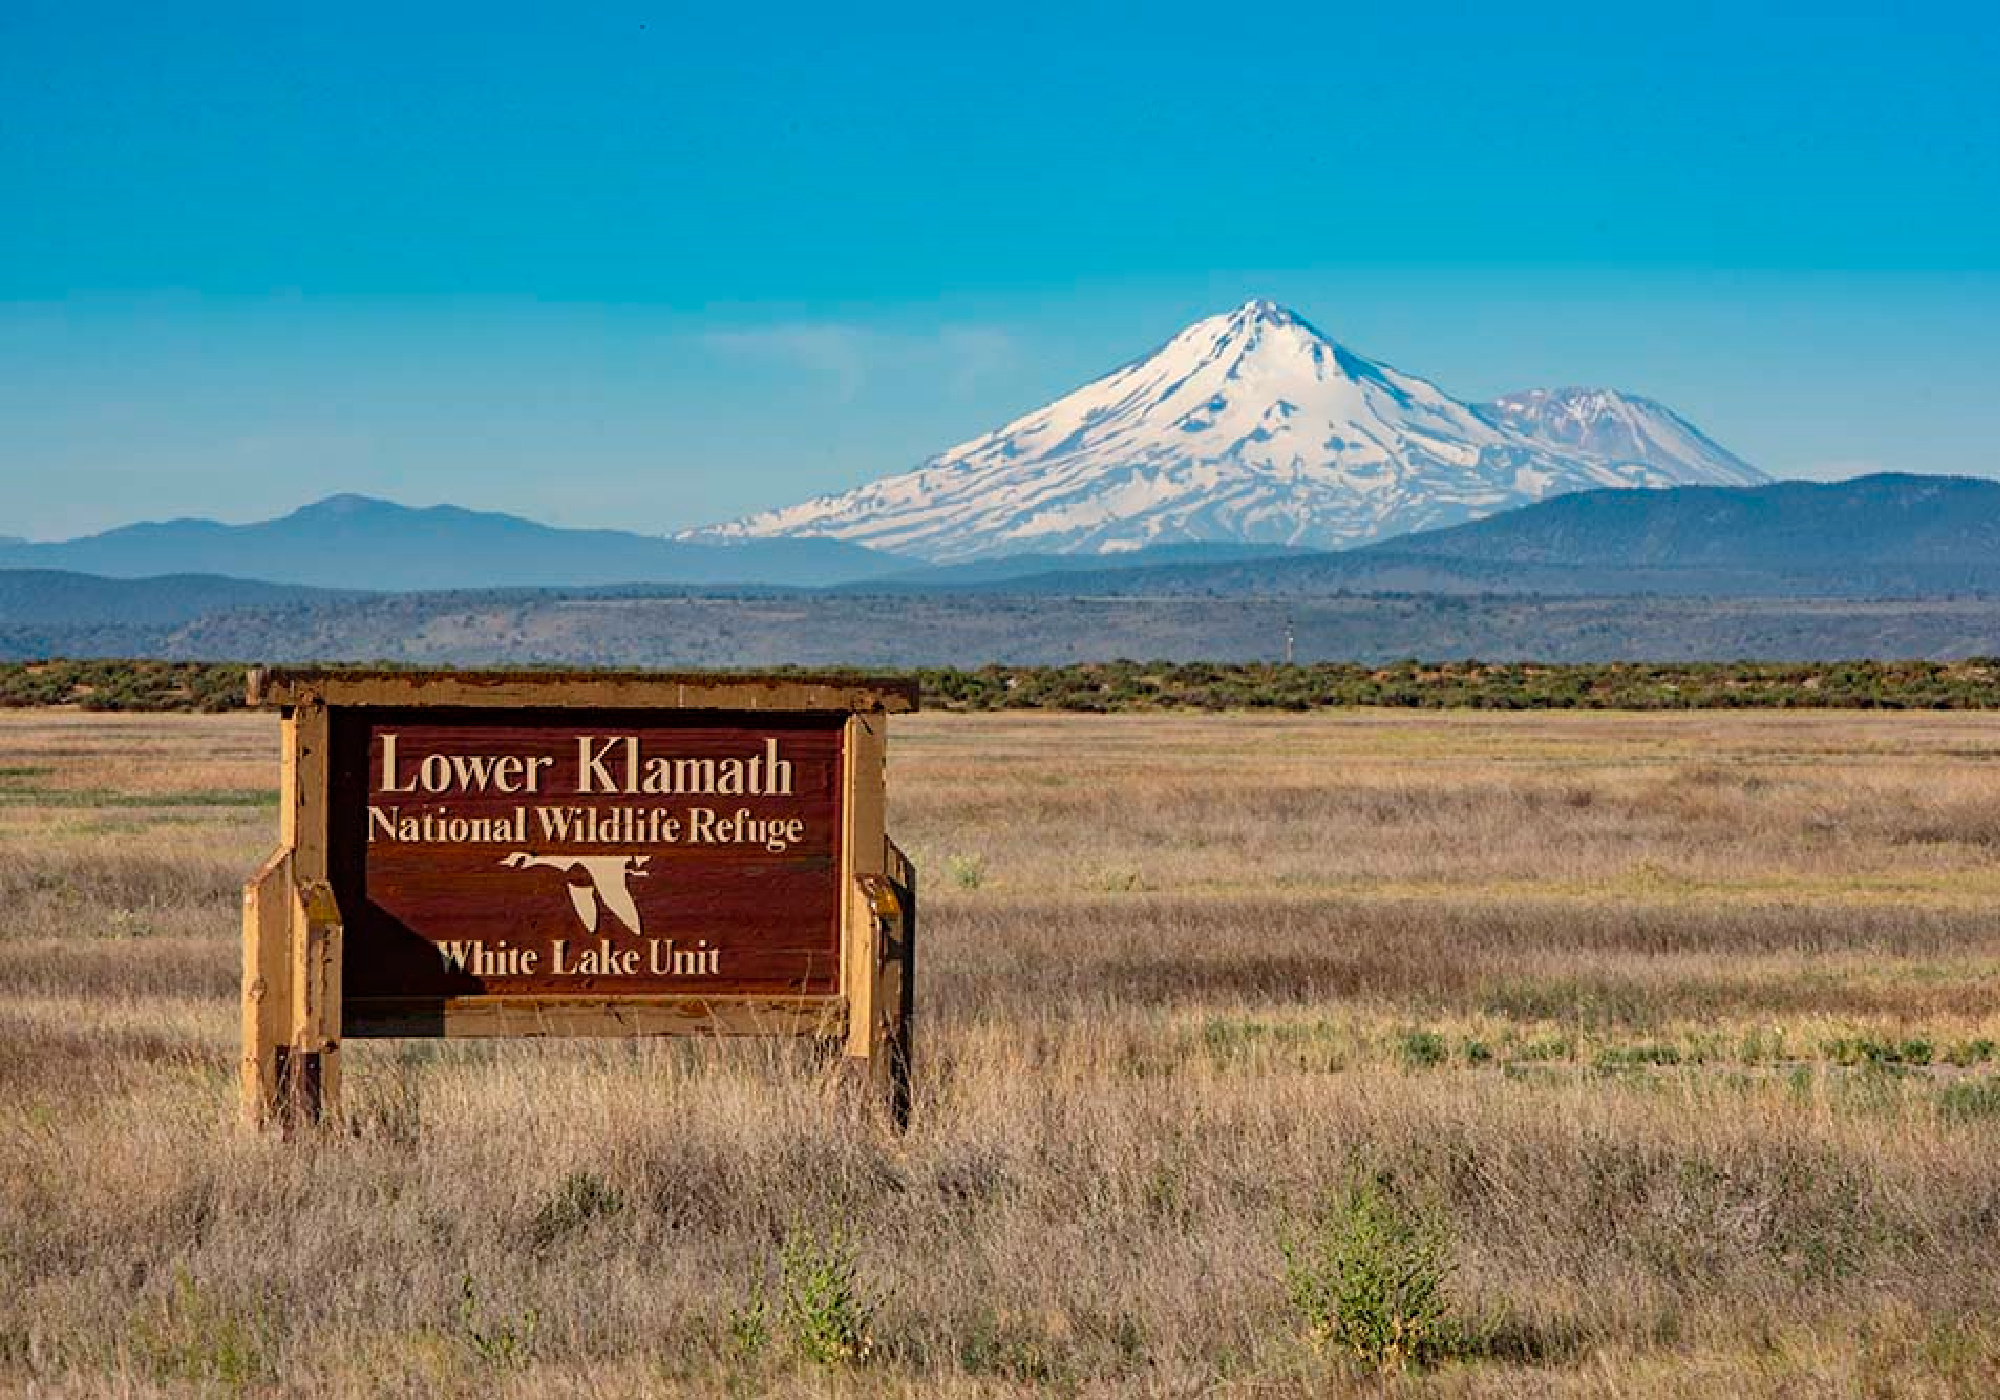 Lower Klamath National Wildlife Refuge closed to all bird hunting this week.